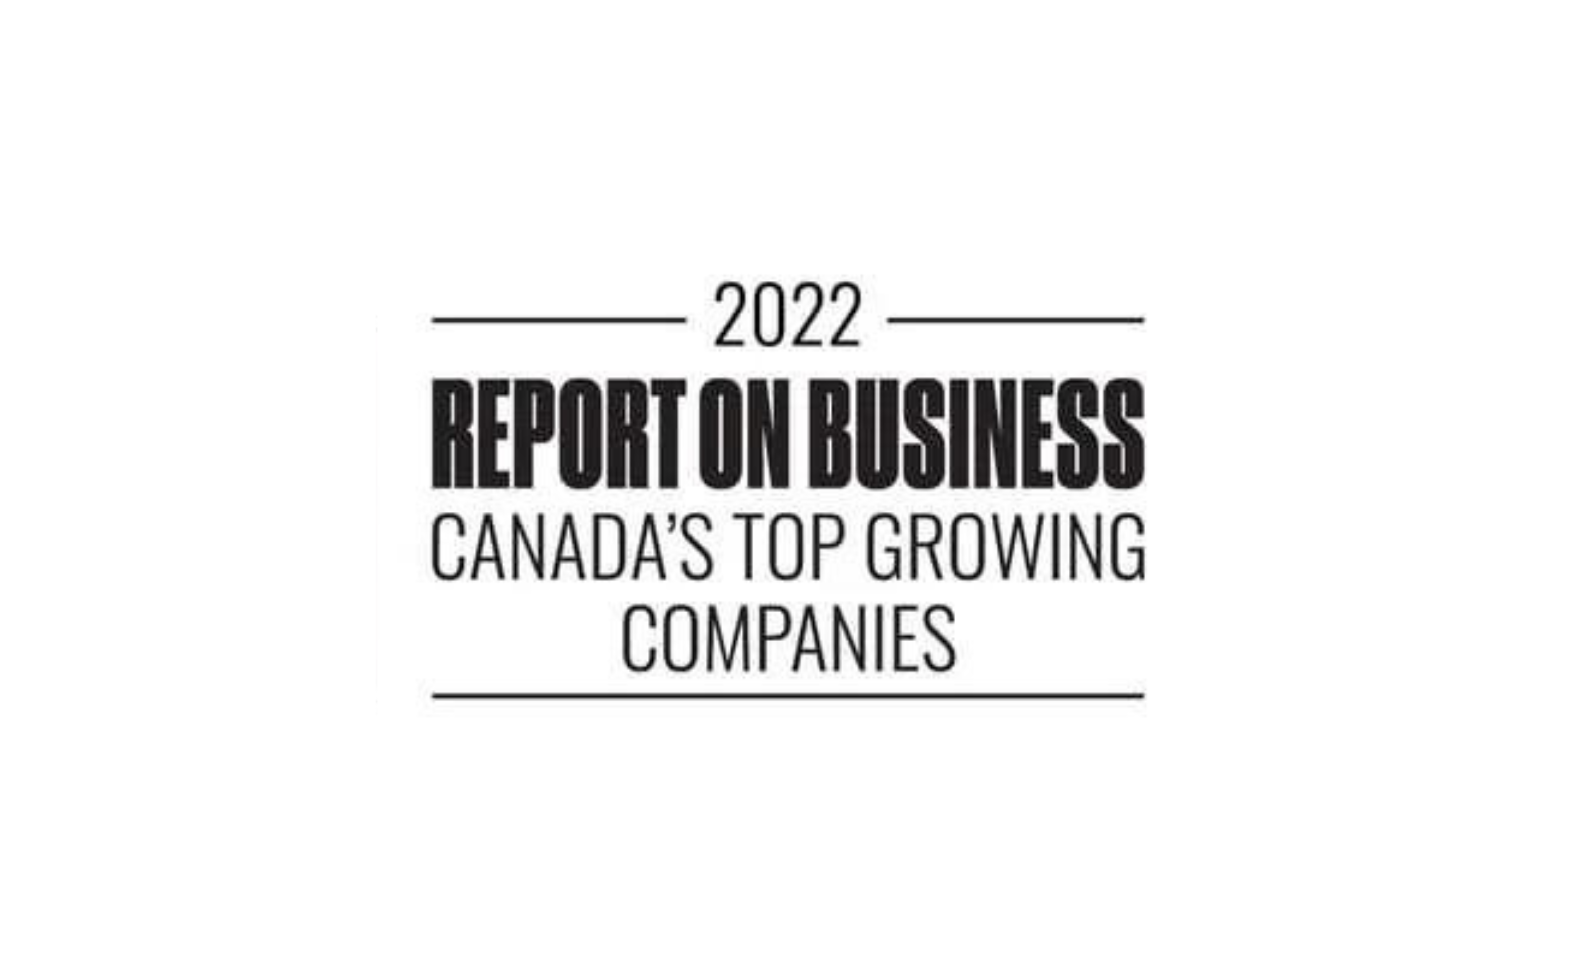 Nexapp named one of Canada’s Top Growing Companies